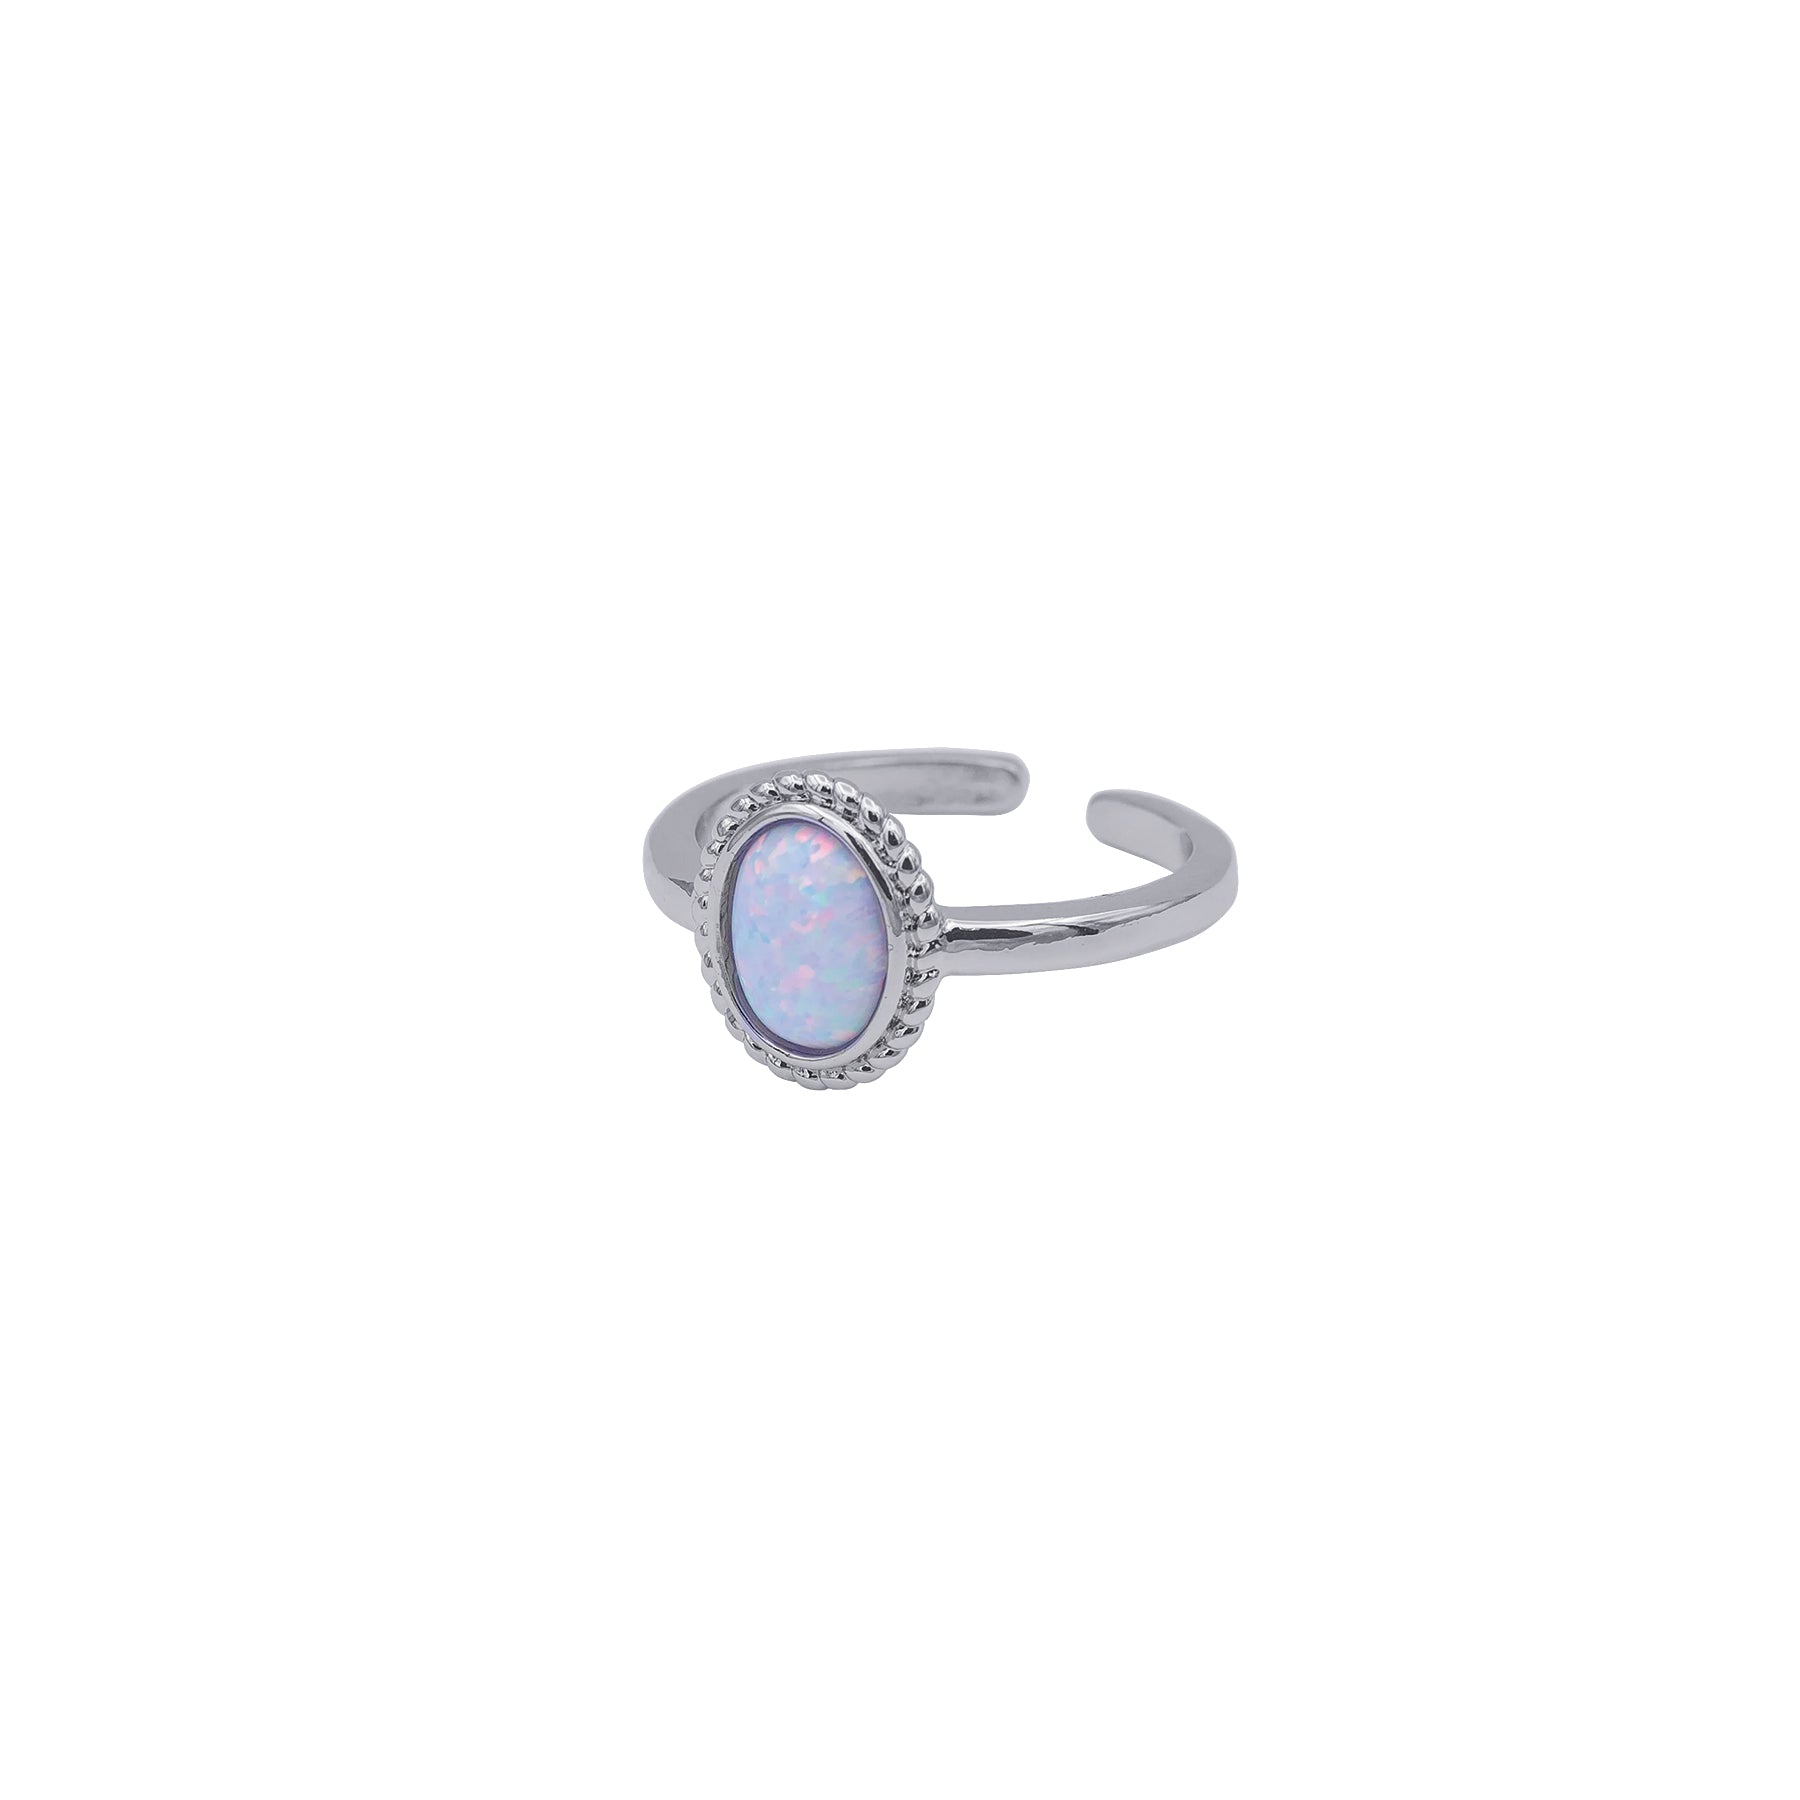 Silver and white opal ring